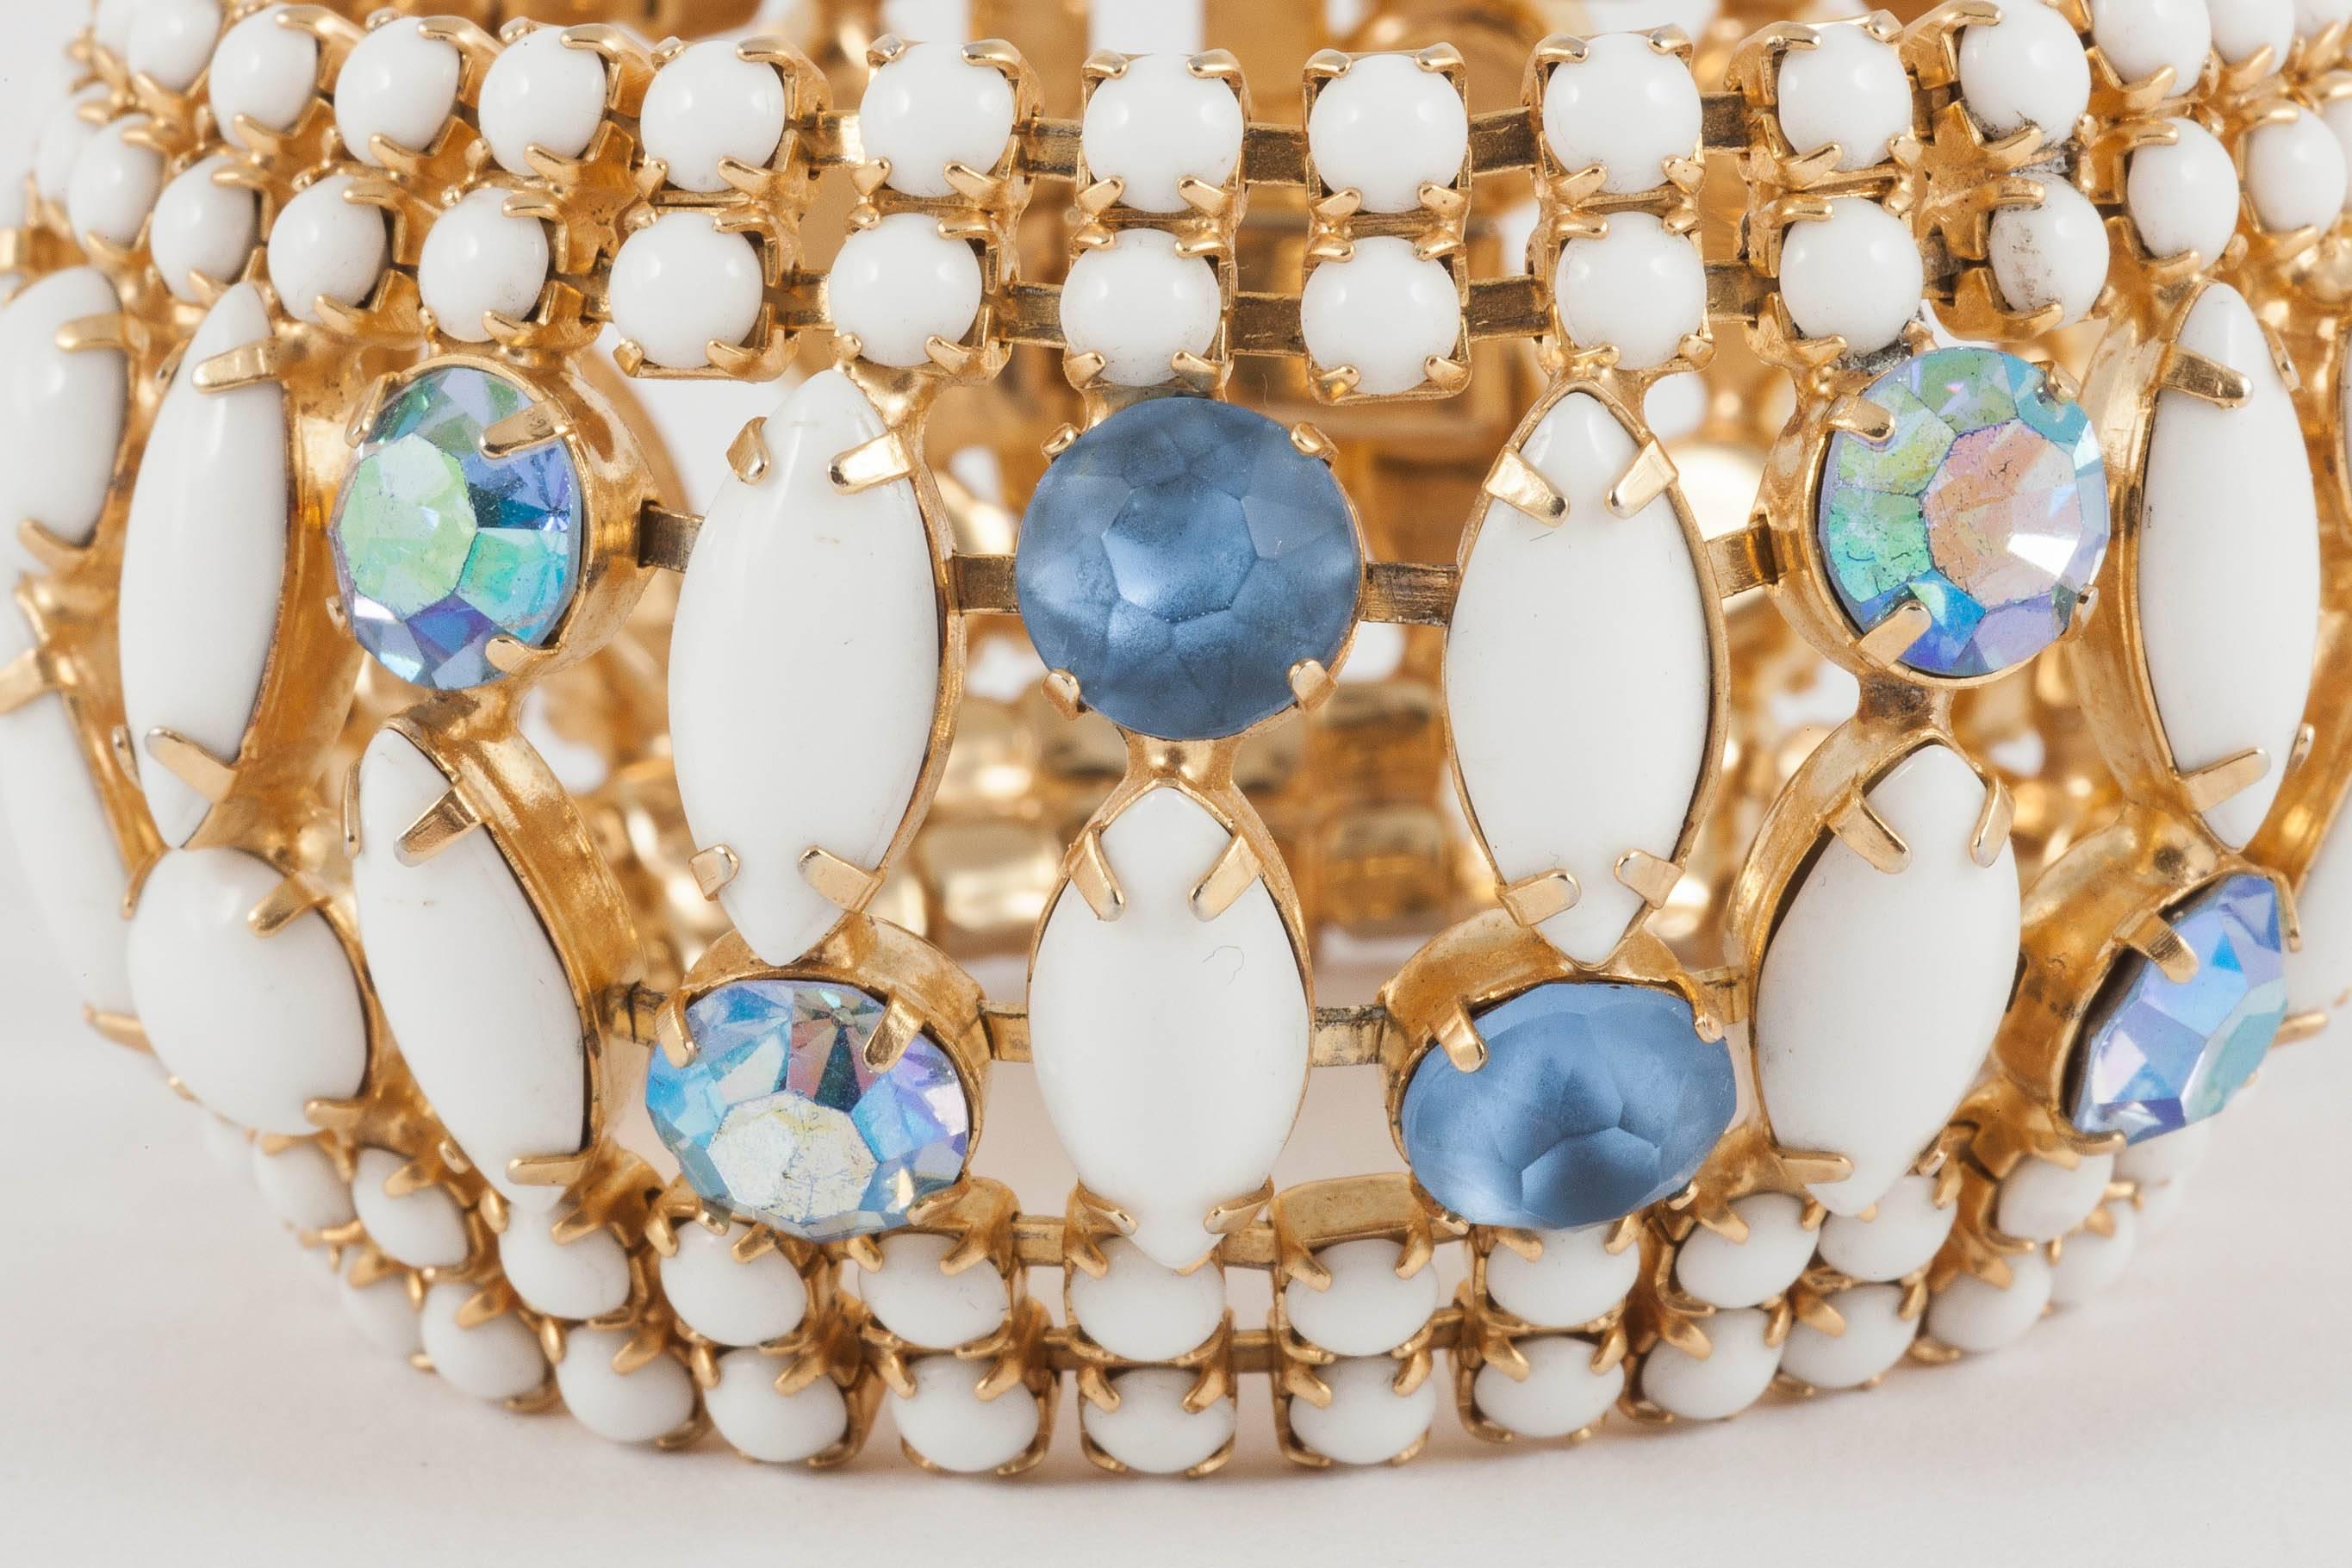 This is a beautifully constructed bracelet. It looks unworn and is a clever shape, looking only slightly domed when laid flat, on the wrist it is convex creating a cuff shape. A great piece for summer.
William Hobe started making theatrical